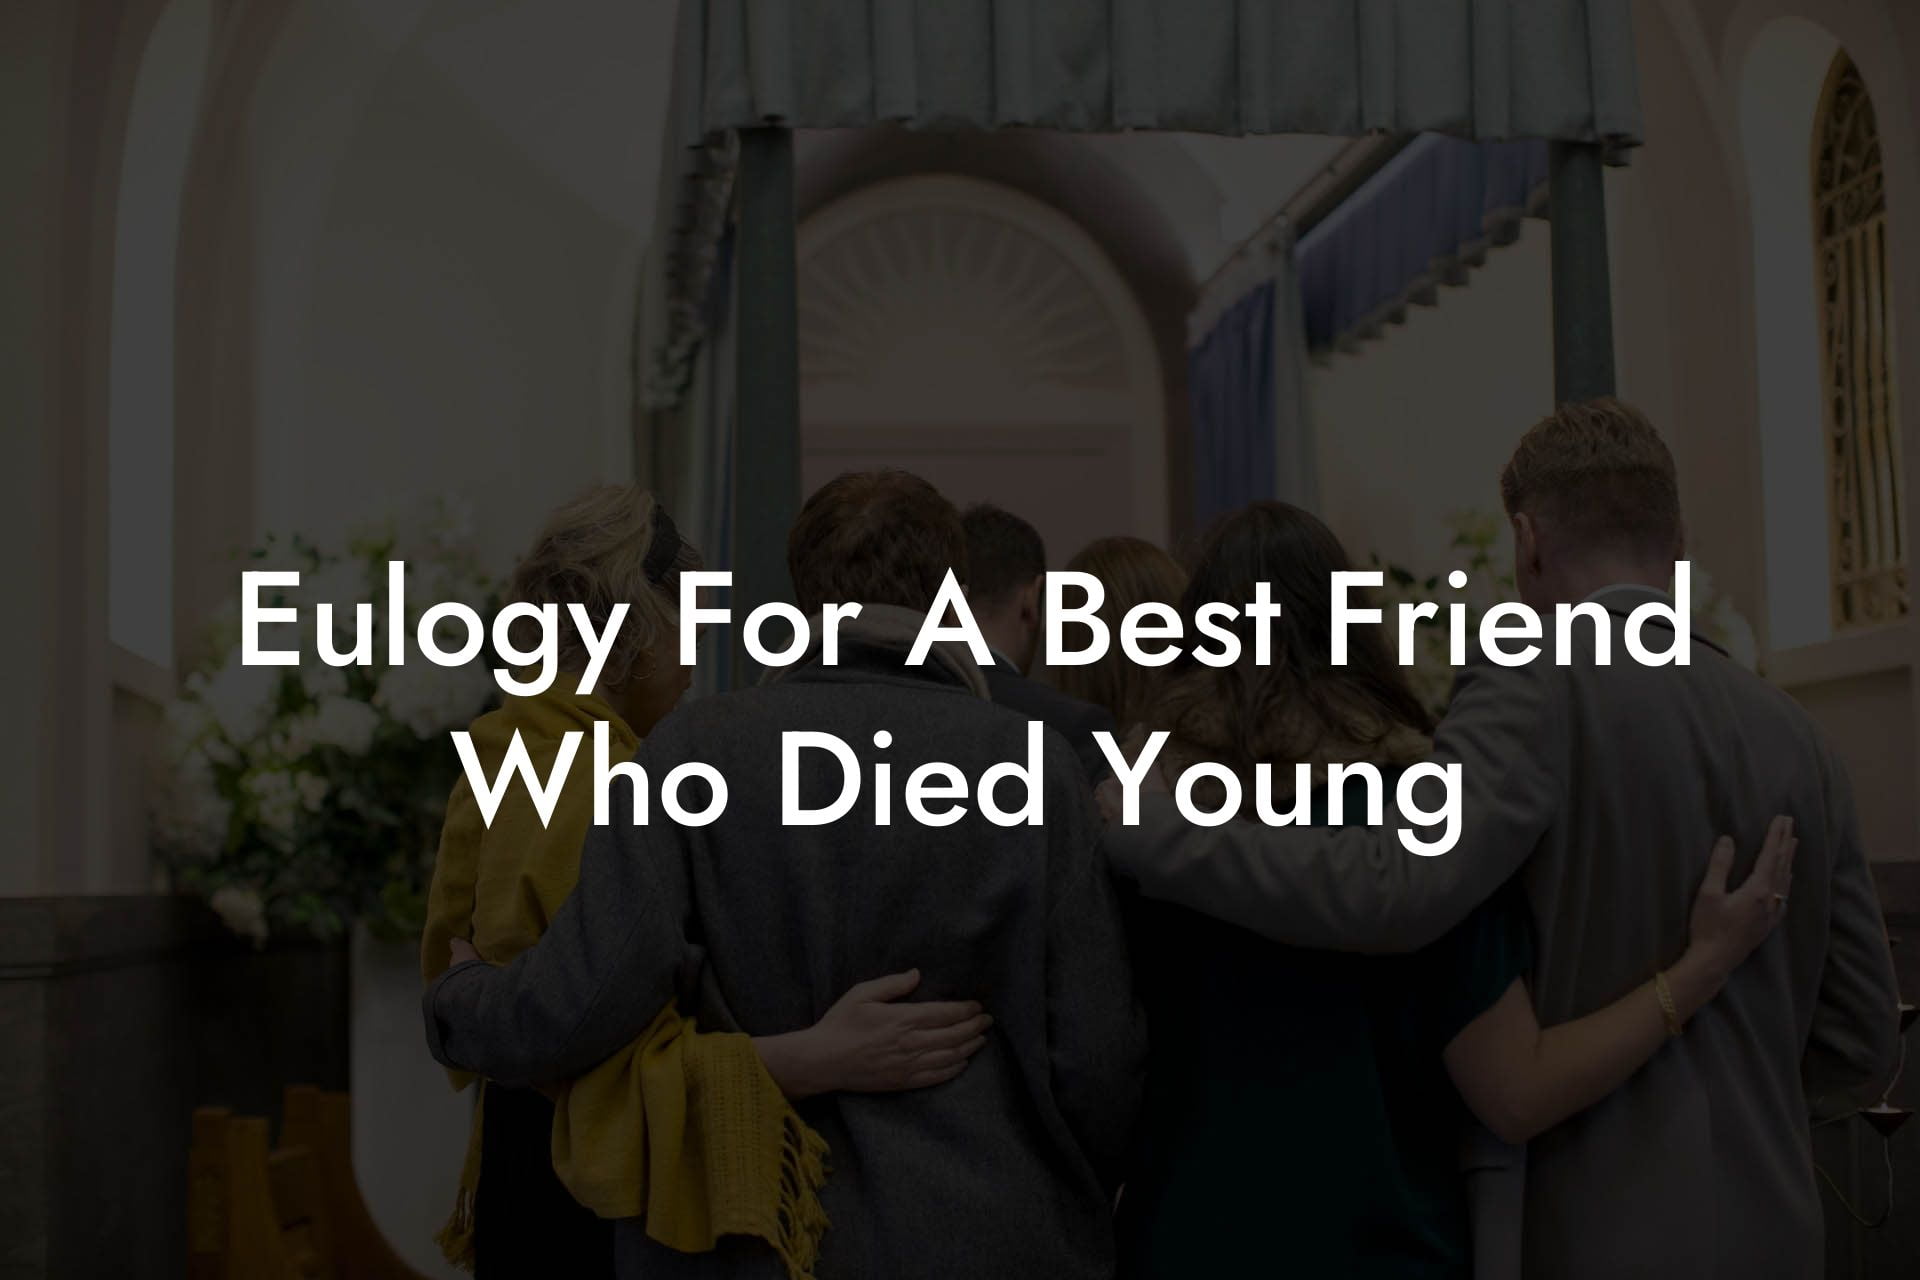 Eulogy For A Best Friend Who Died Young